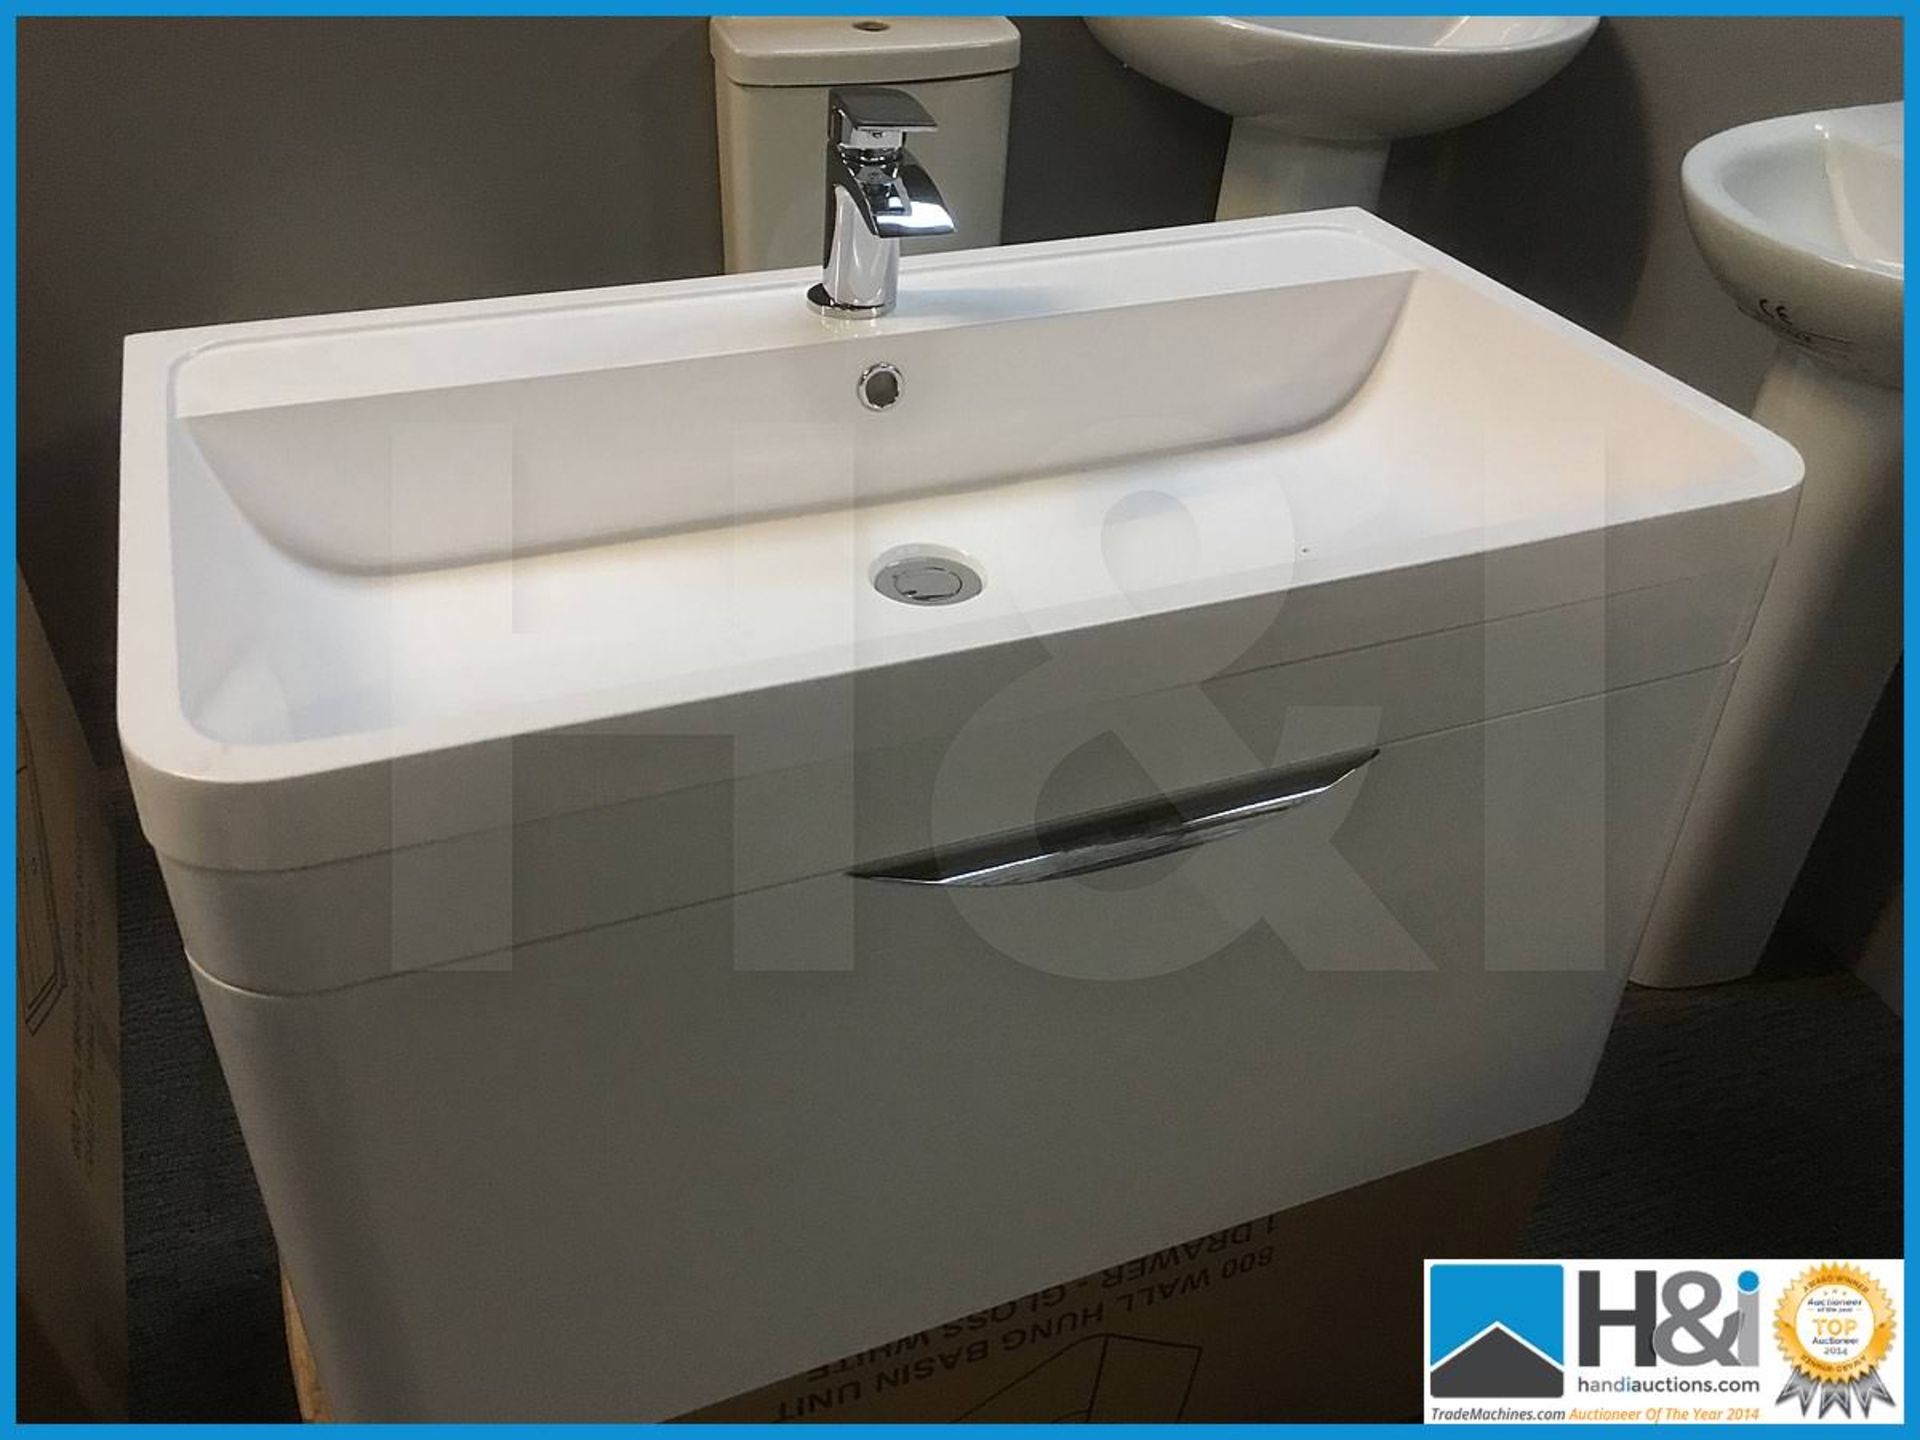 Beautiful designer Ultra wall hung 800 vanity unit compete with matching designer acrylic basin